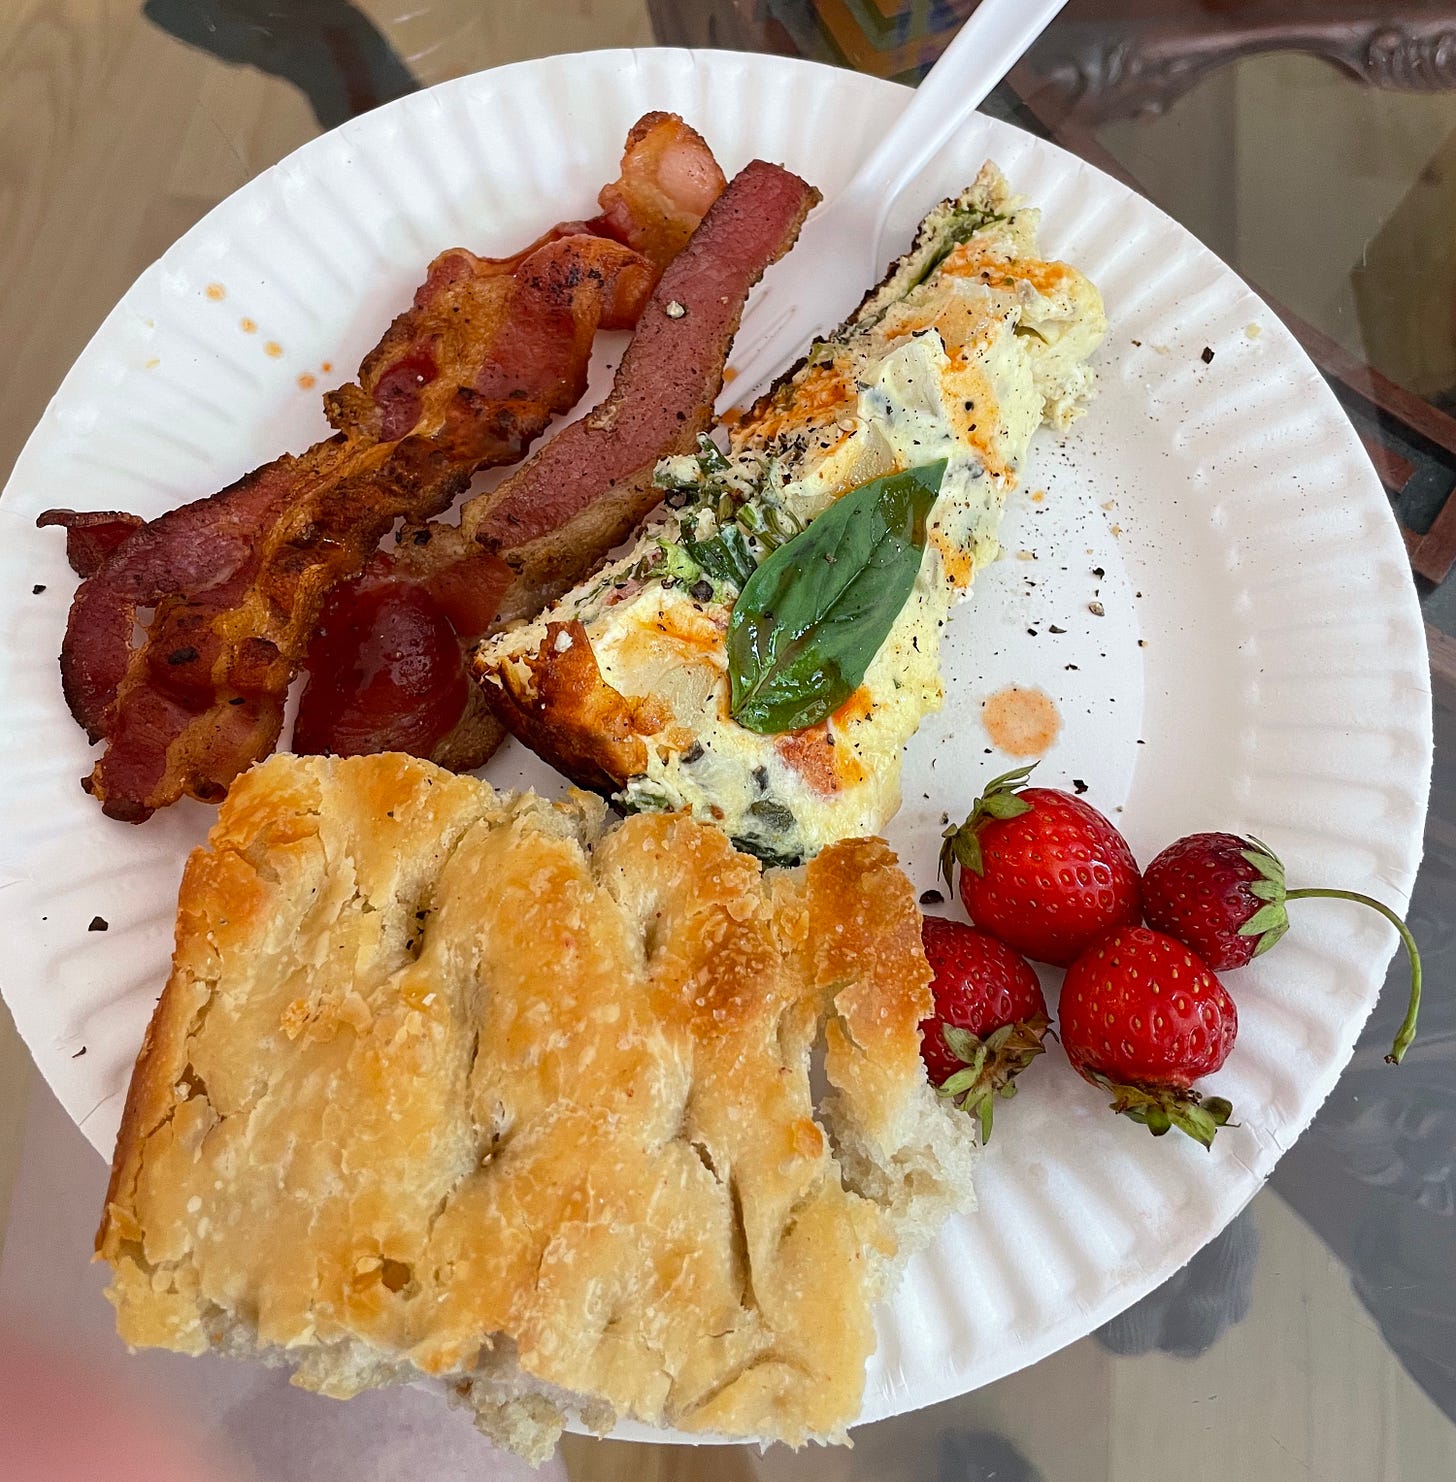 homemade foccacia, bacon, frittata (!), and incredibly adorable strawberries